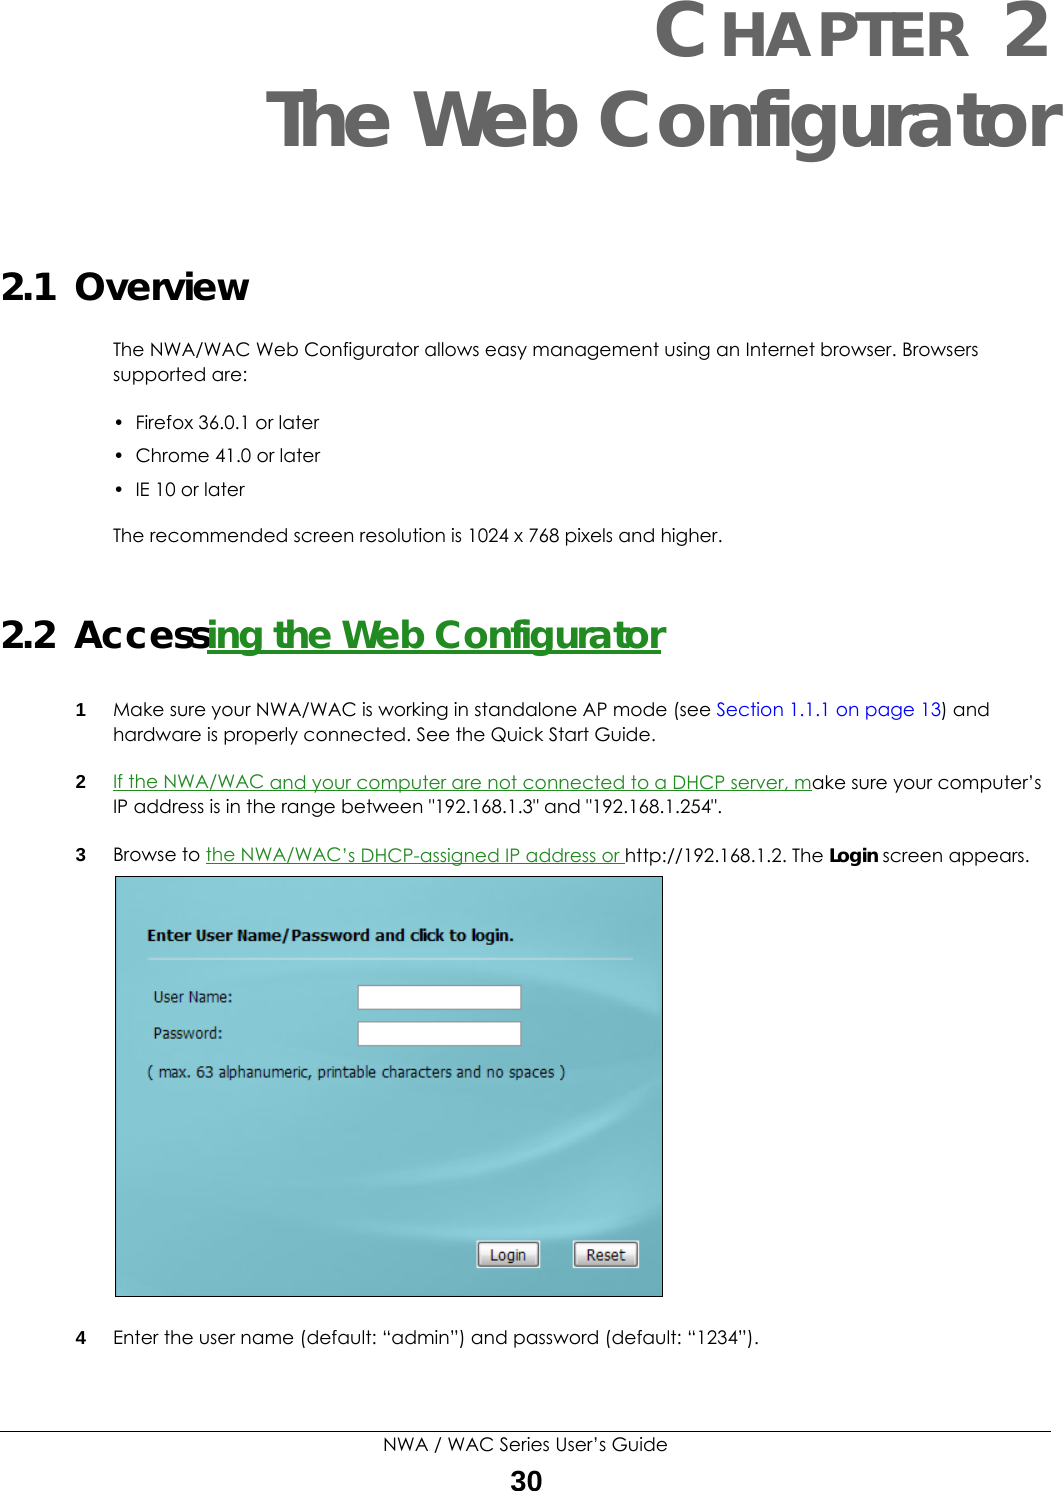 NWA / WAC Series User’s Guide30CHAPTER 2The Web Configurator2.1  OverviewThe NWA/WAC Web Configurator allows easy management using an Internet browser. Browsers supported are:• Firefox 36.0.1 or later• Chrome 41.0 or later• IE 10 or laterThe recommended screen resolution is 1024 x 768 pixels and higher.2.2  Accessing the Web Configurator1Make sure your NWA/WAC is working in standalone AP mode (see Section 1.1.1 on page 13) and hardware is properly connected. See the Quick Start Guide.2If the NWA/WAC and your computer are not connected to a DHCP server, make sure your computer’s IP address is in the range between &quot;192.168.1.3&quot; and &quot;192.168.1.254&quot;.3Browse to the NWA/WAC’s DHCP-assigned IP address or http://192.168.1.2. The Login screen appears. 4Enter the user name (default: “admin”) and password (default: “1234”).